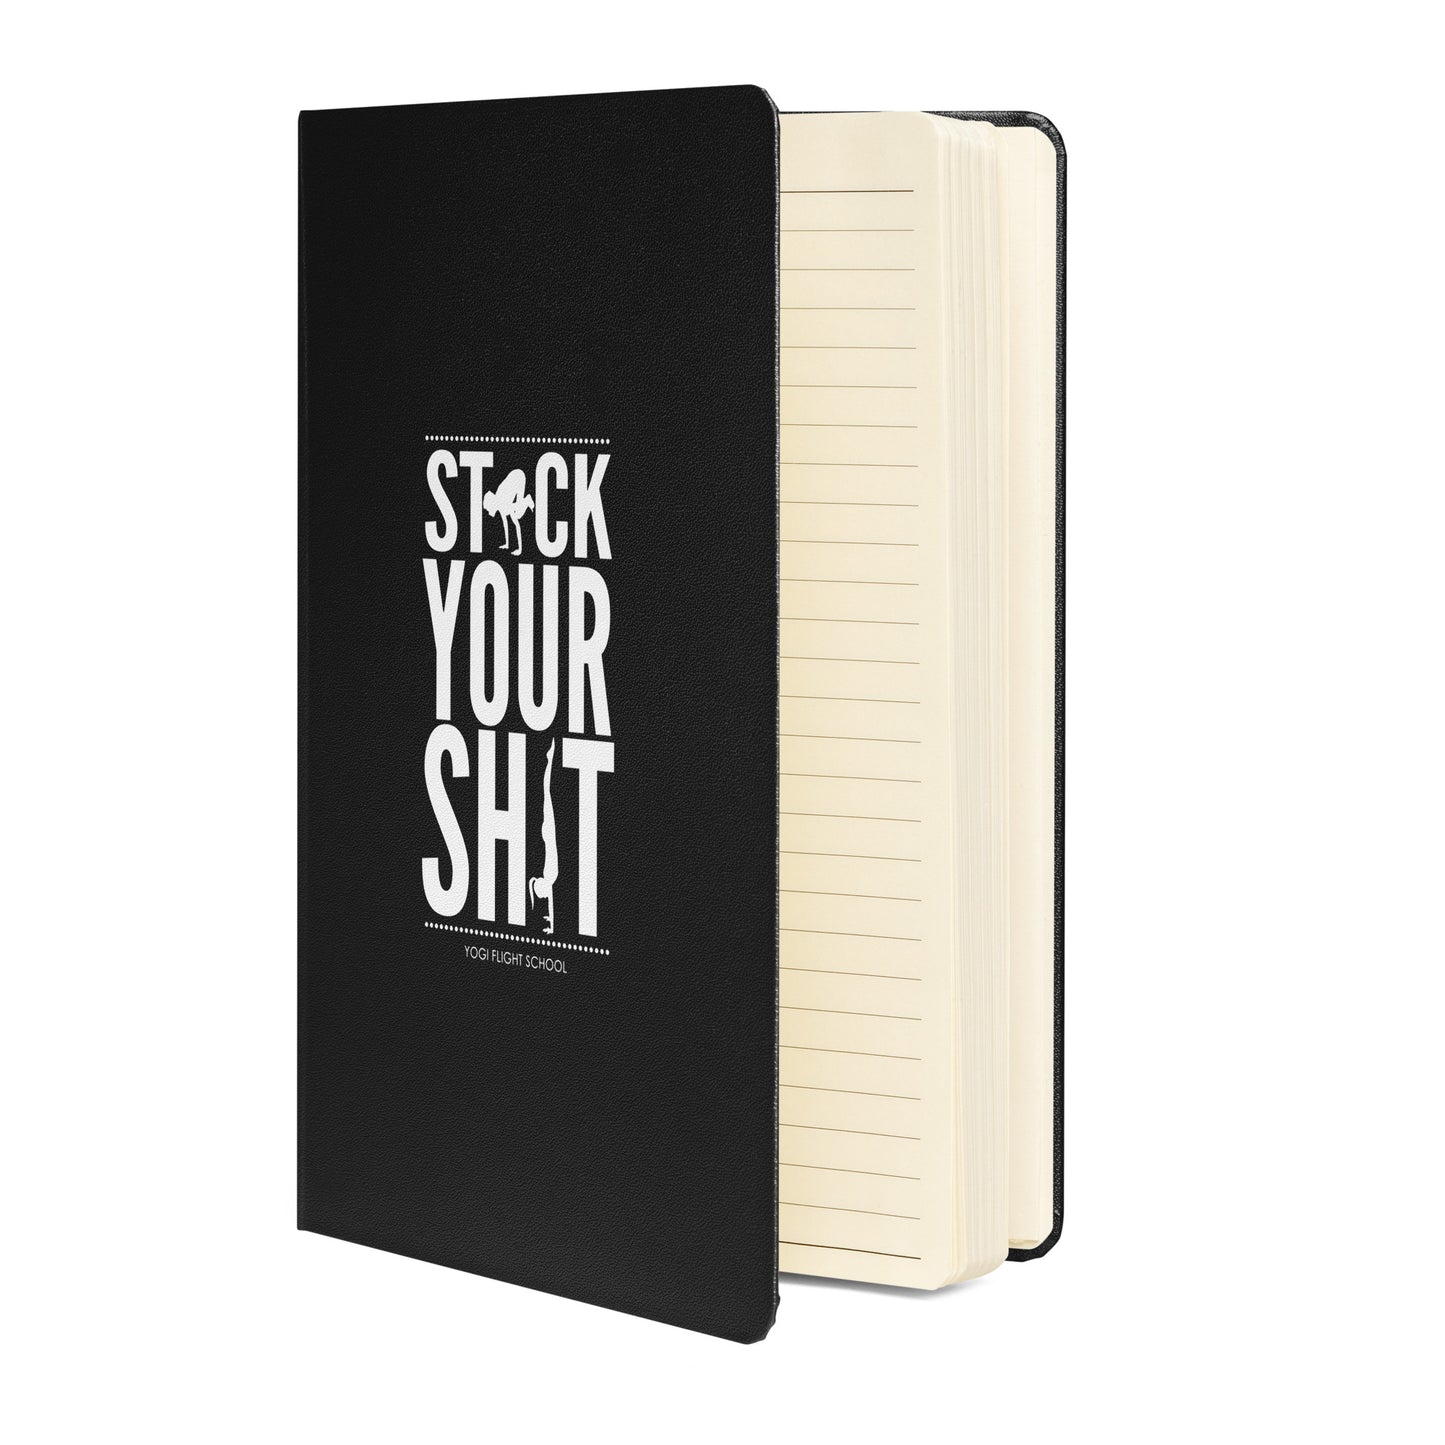 Stack Your Sh*t Hardcover bound notebook